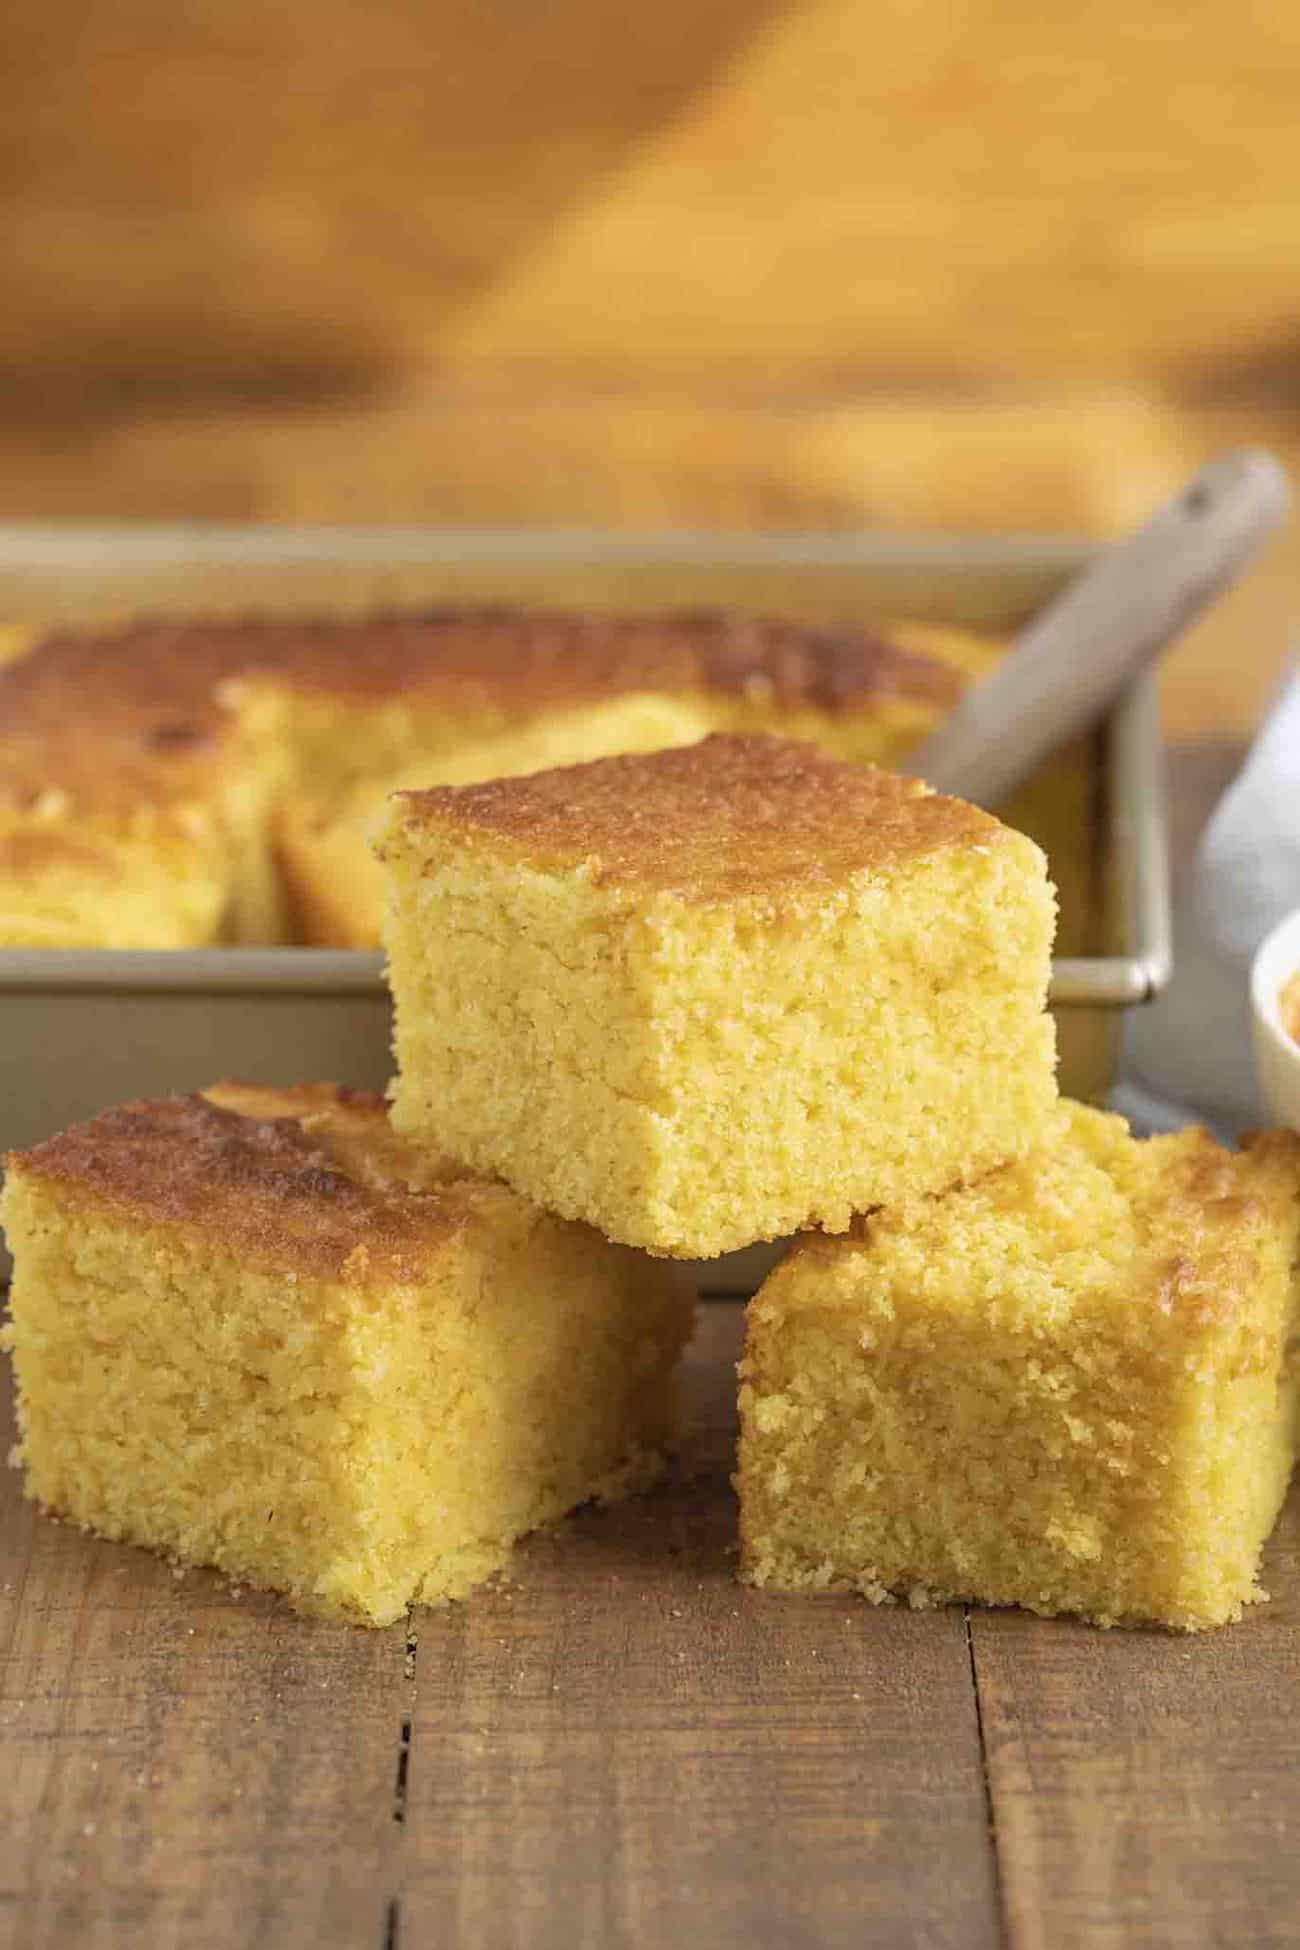 Cornbread Made With Corn Grits Recipes : Southern Style Unsweetened Cornbread Recipe Serious ...